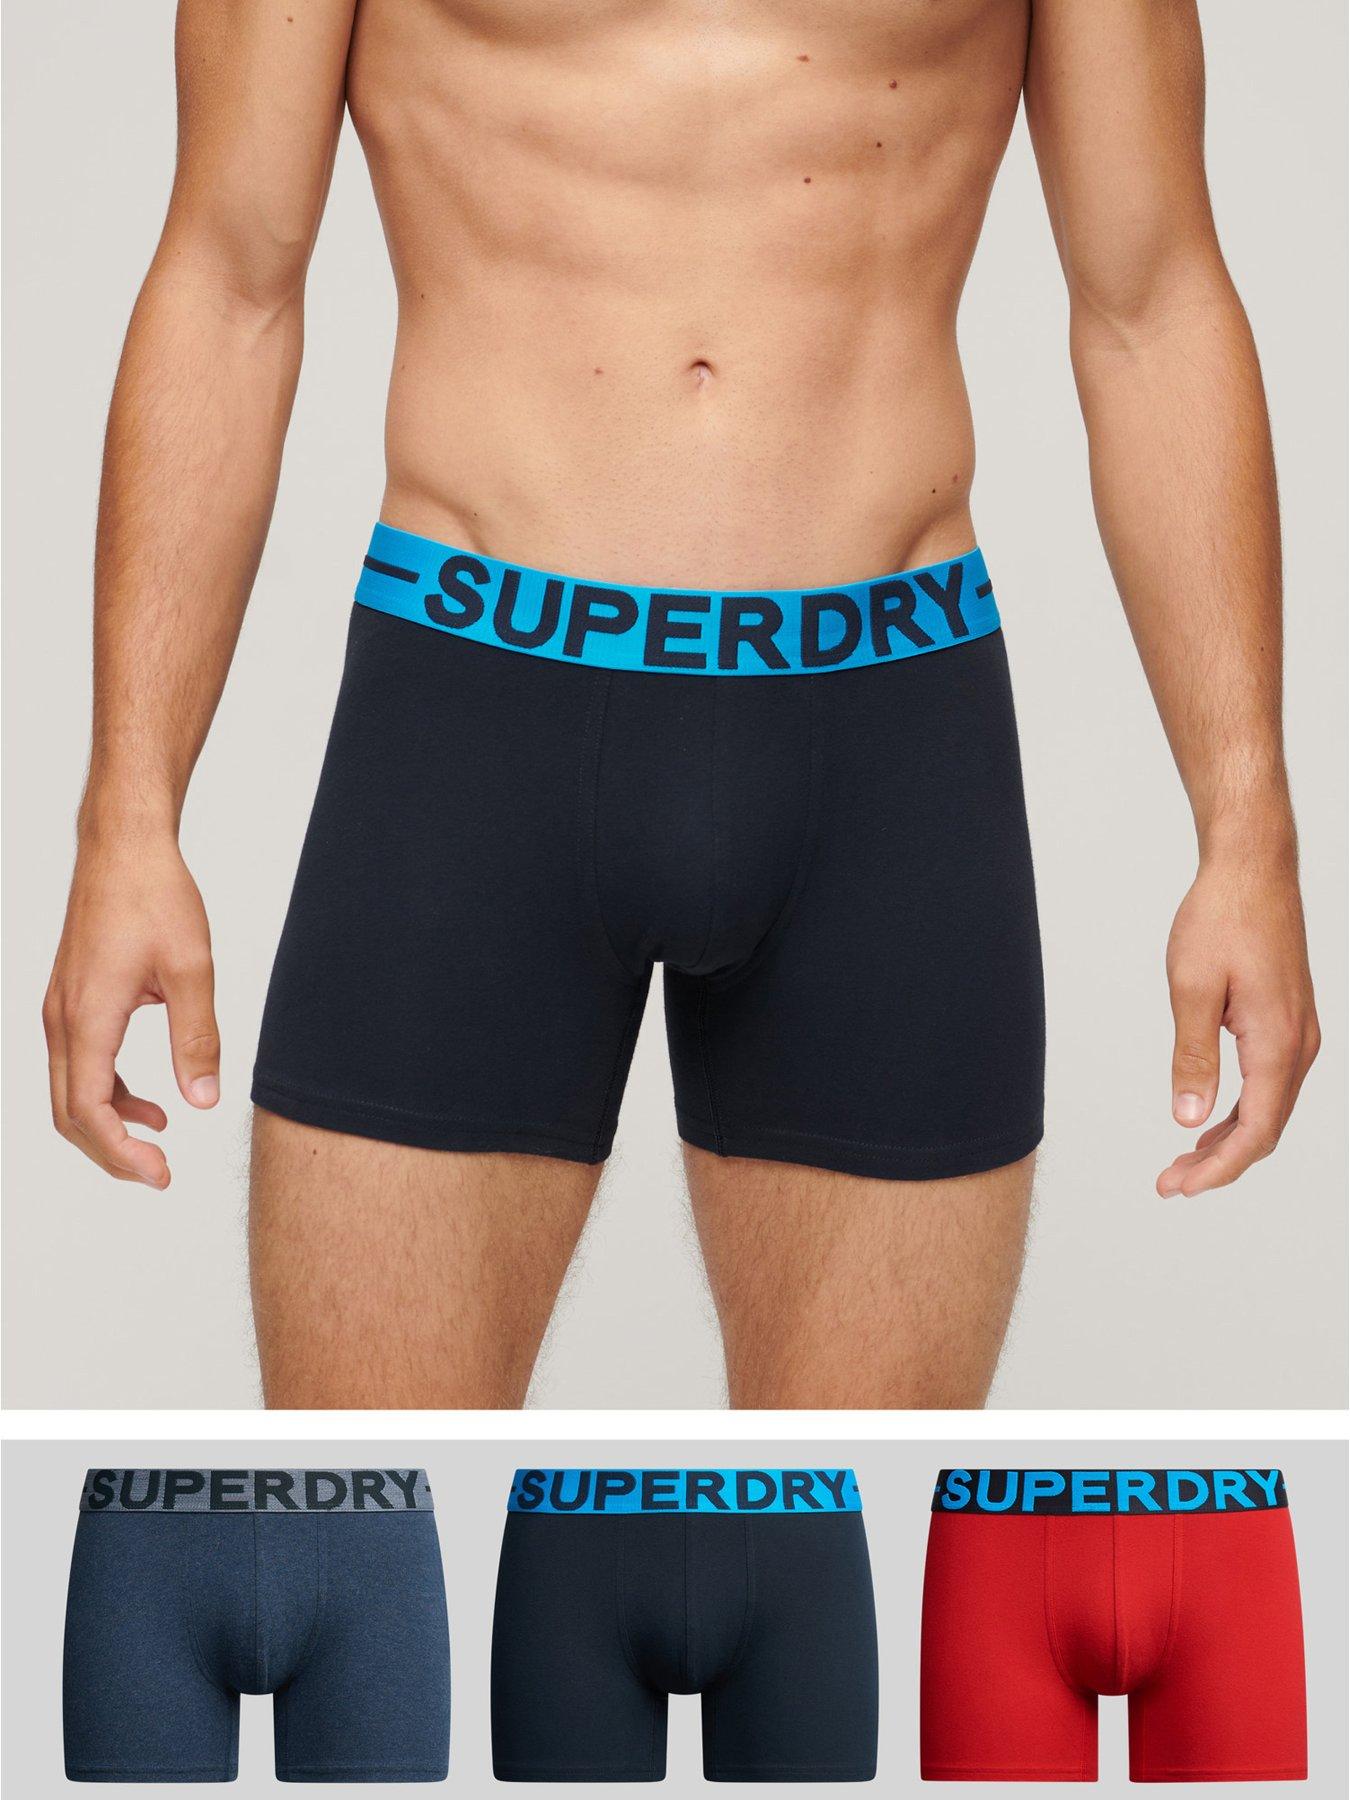 CK classic underwear (boxer / trunk), fit size L, Men's Fashion, Bottoms,  New Underwear on Carousell